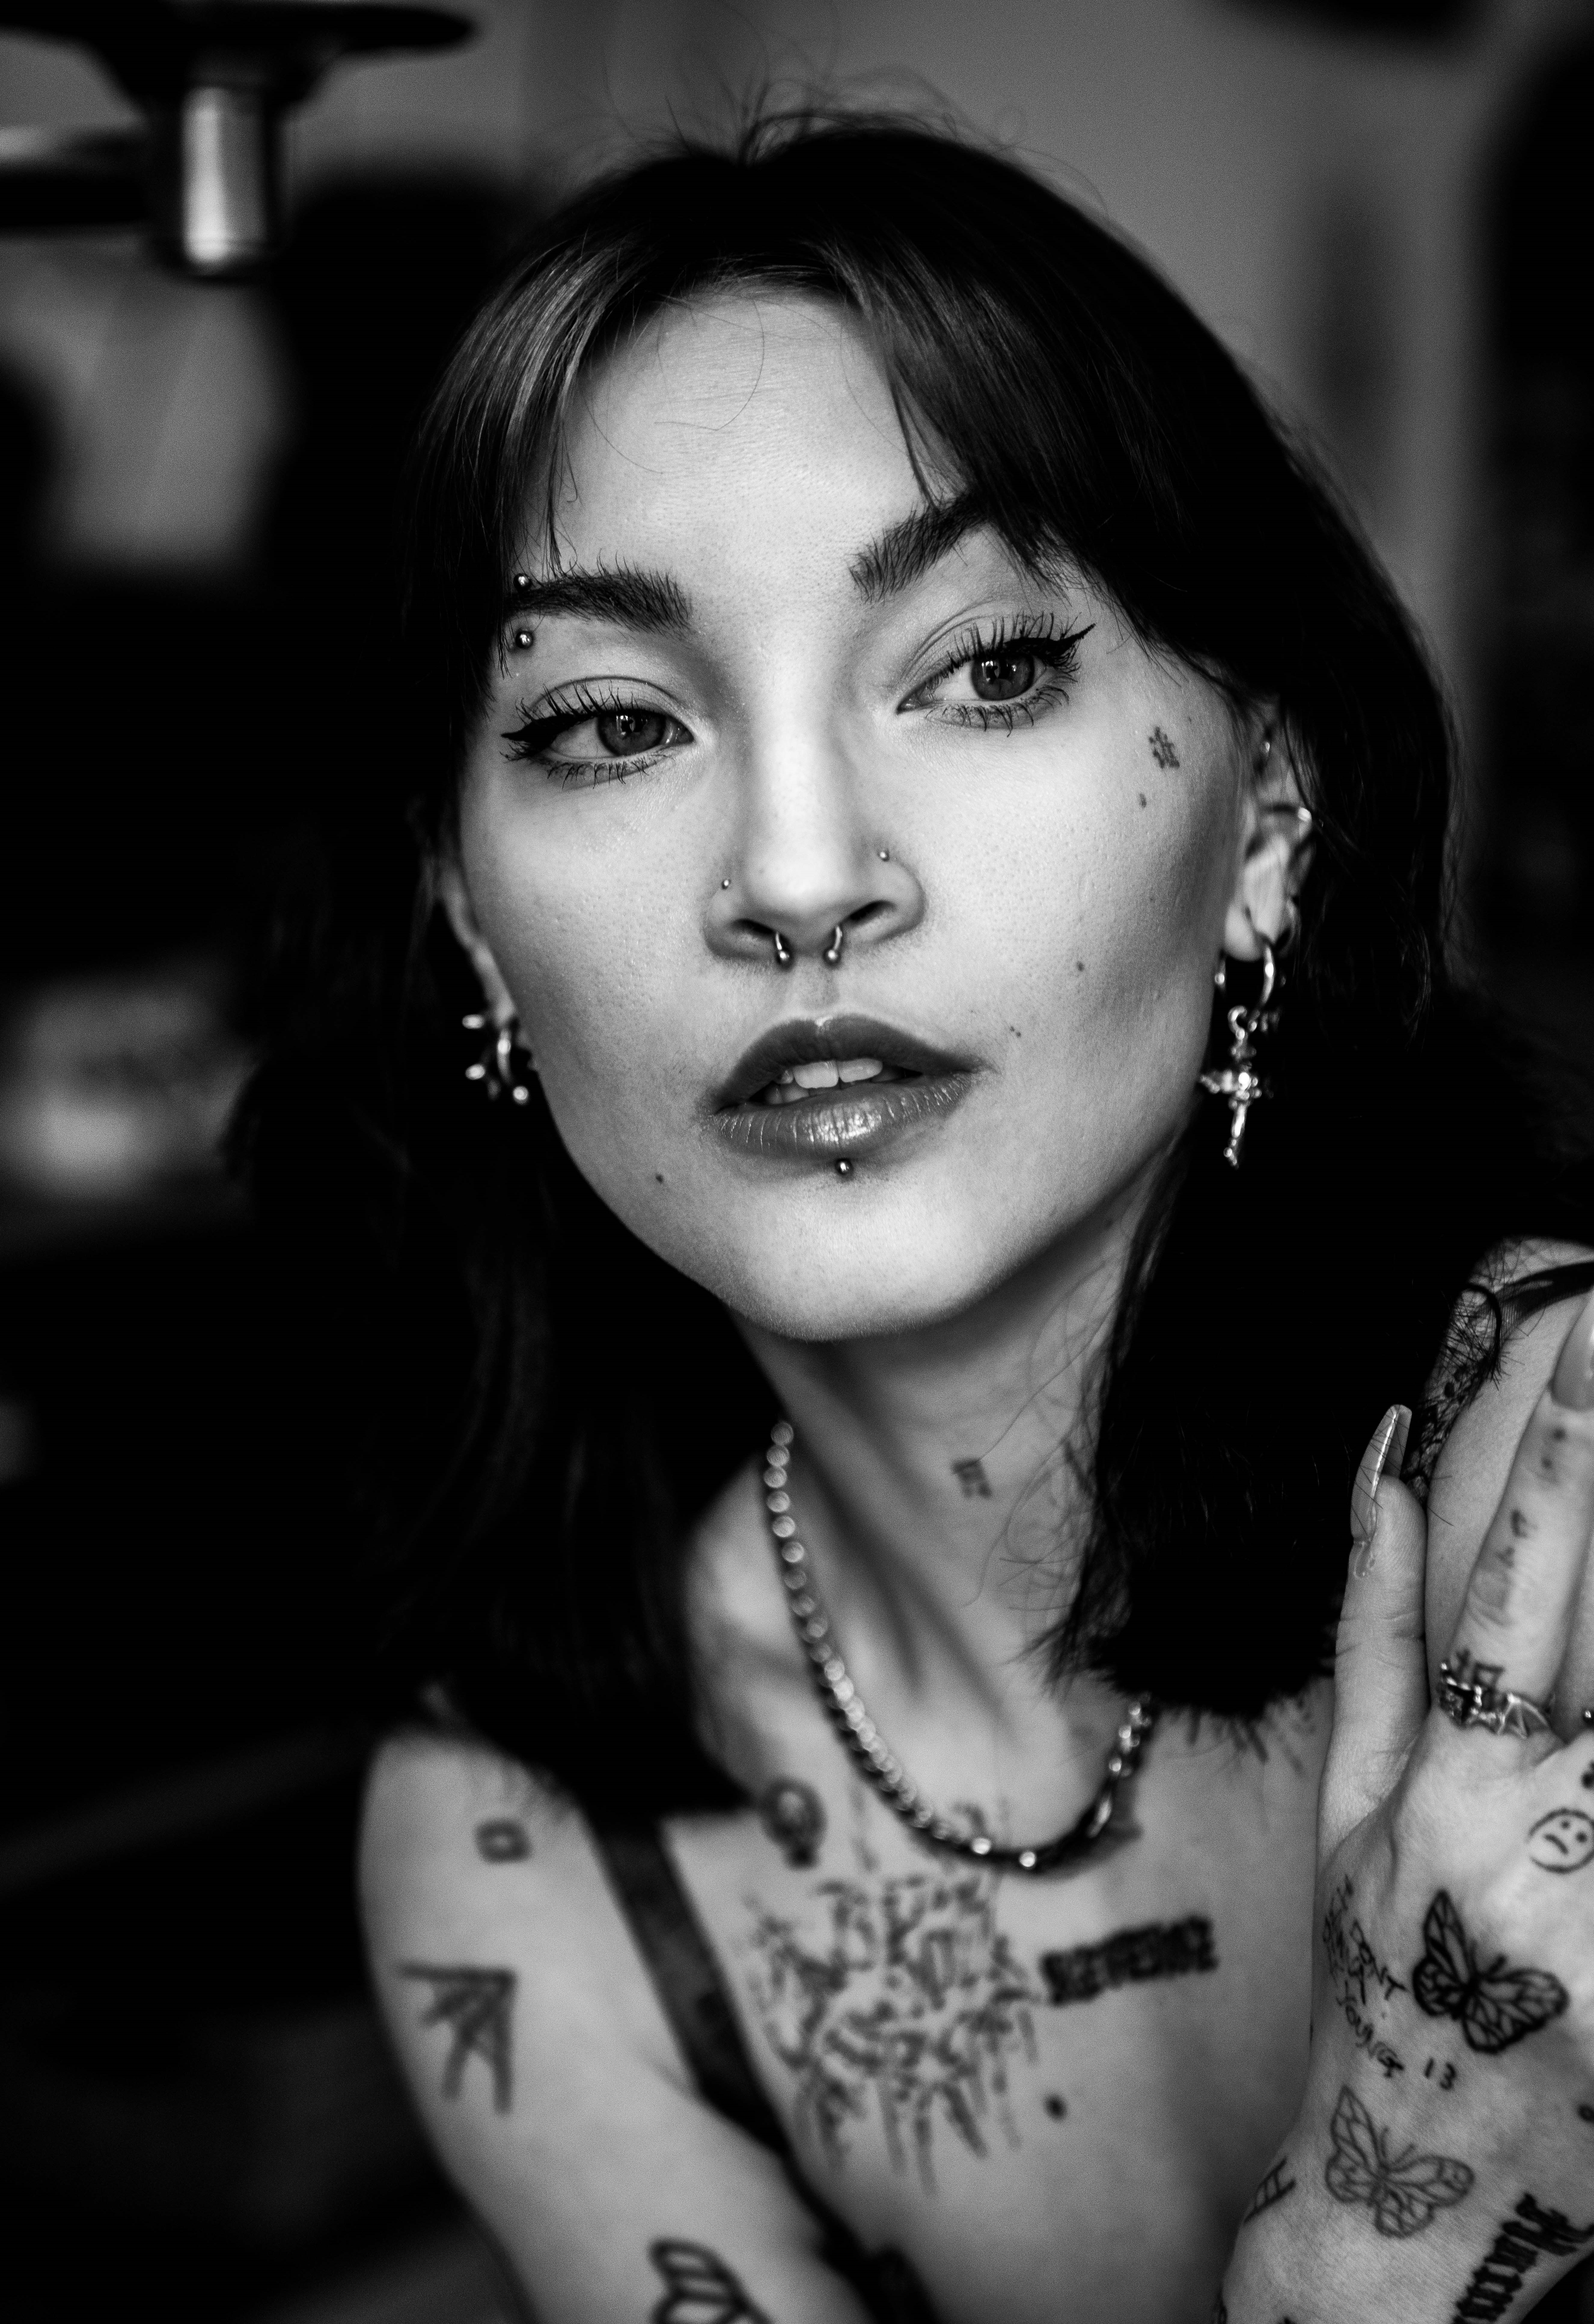 Rebby Yuer Foster, a Chinese-American person with brunette hair, tattoos, and piercings. The photo of them is in black and white.